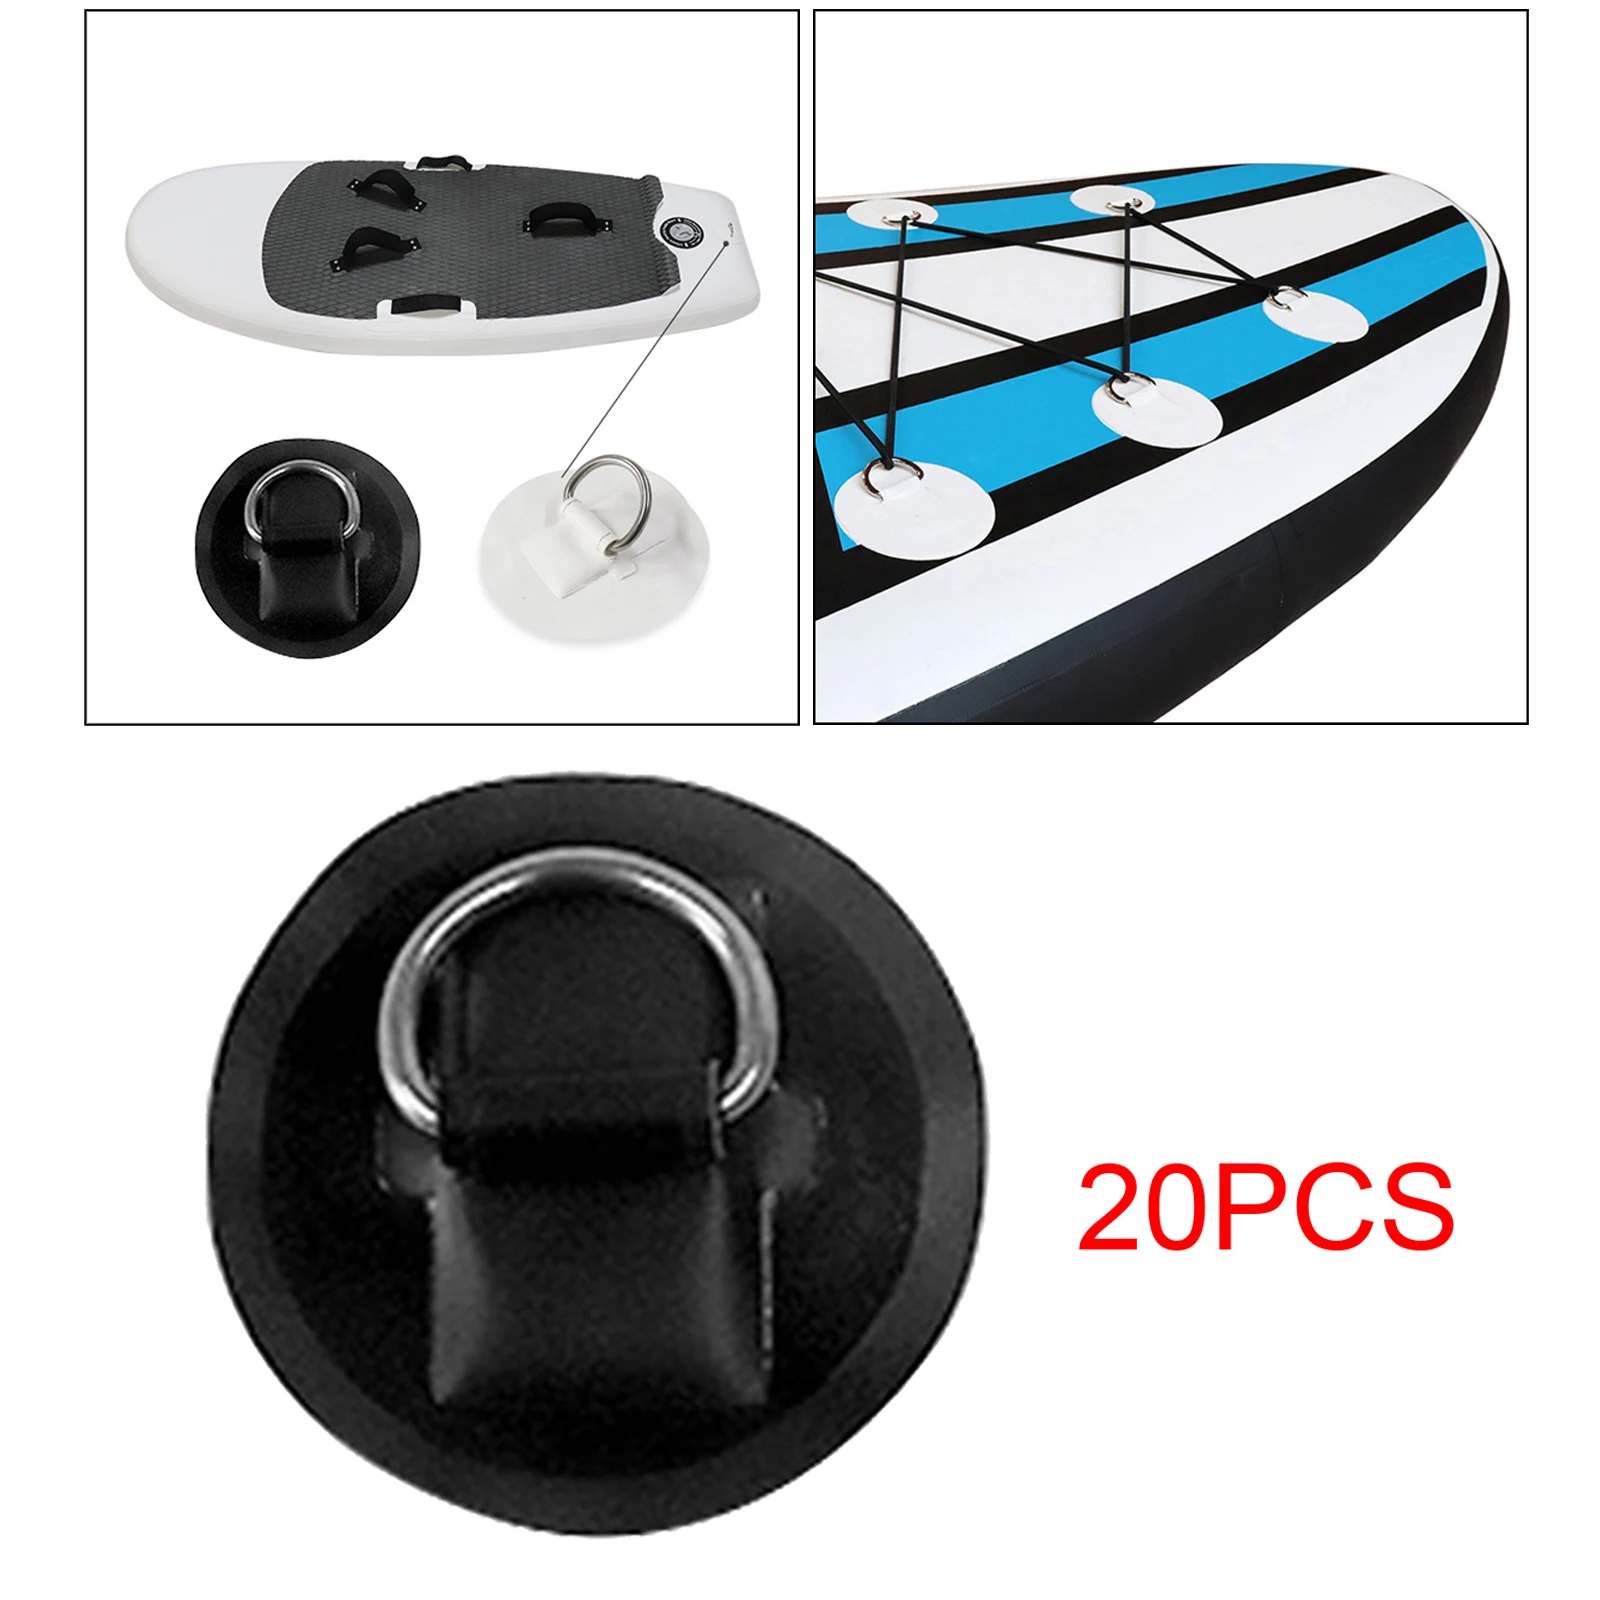 20pcs Inflatable Boat D-ring PVC Round Pad/Patch Watercraft Inflated Kayak Rubber Raft Rigging Rope D Buckles Parts Accessories